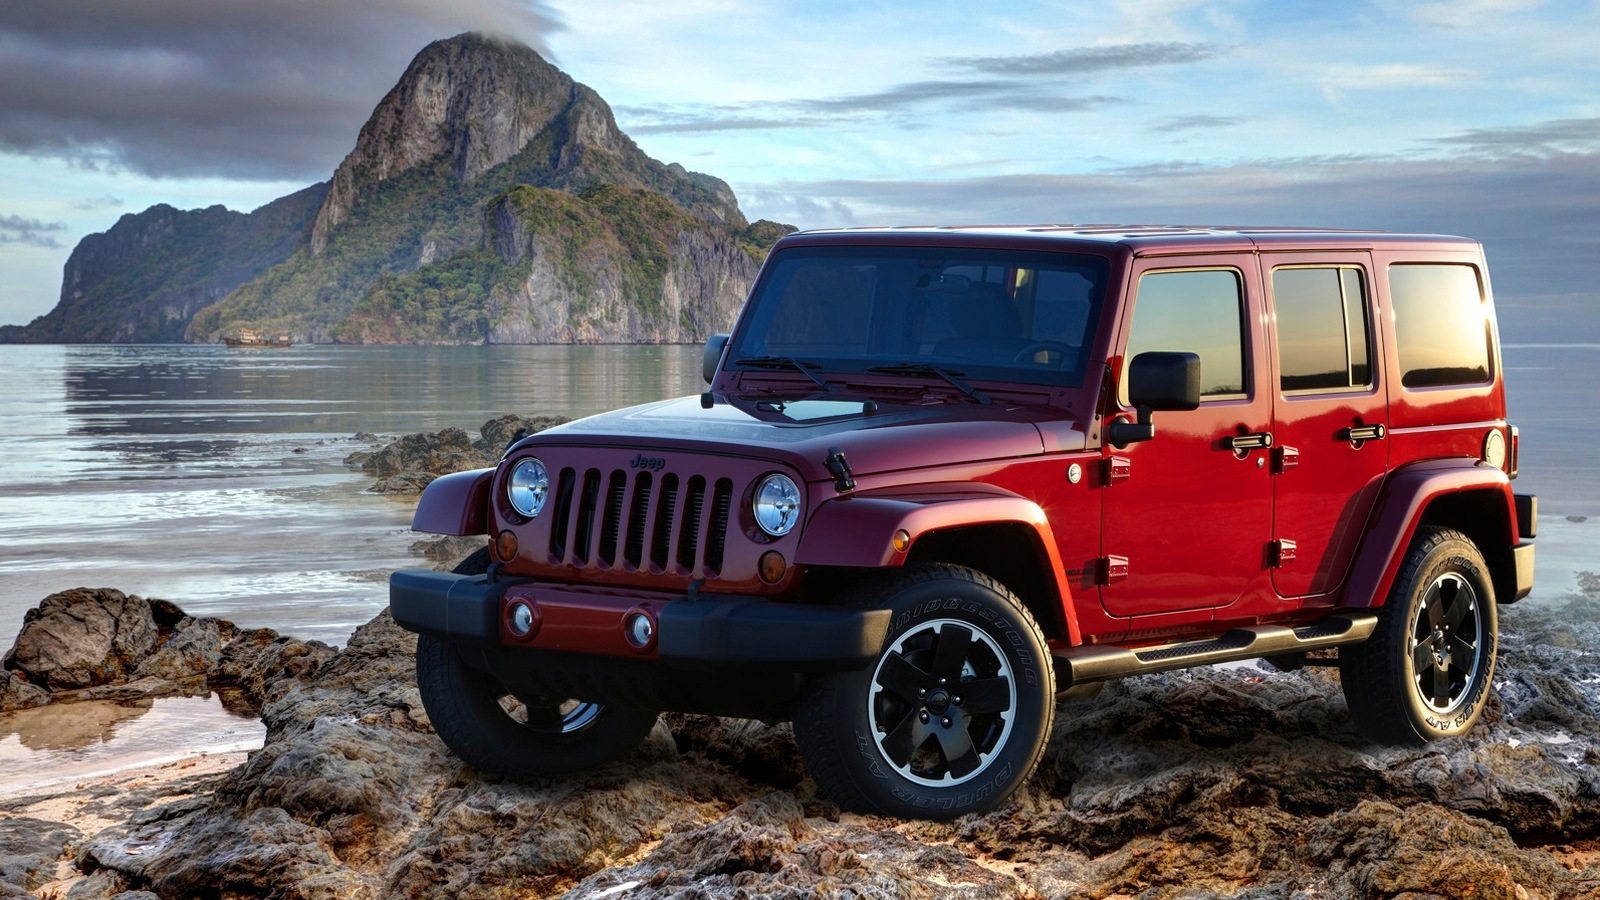 2012 Jeep Wrangler Unlimited Altitude Edition Announced